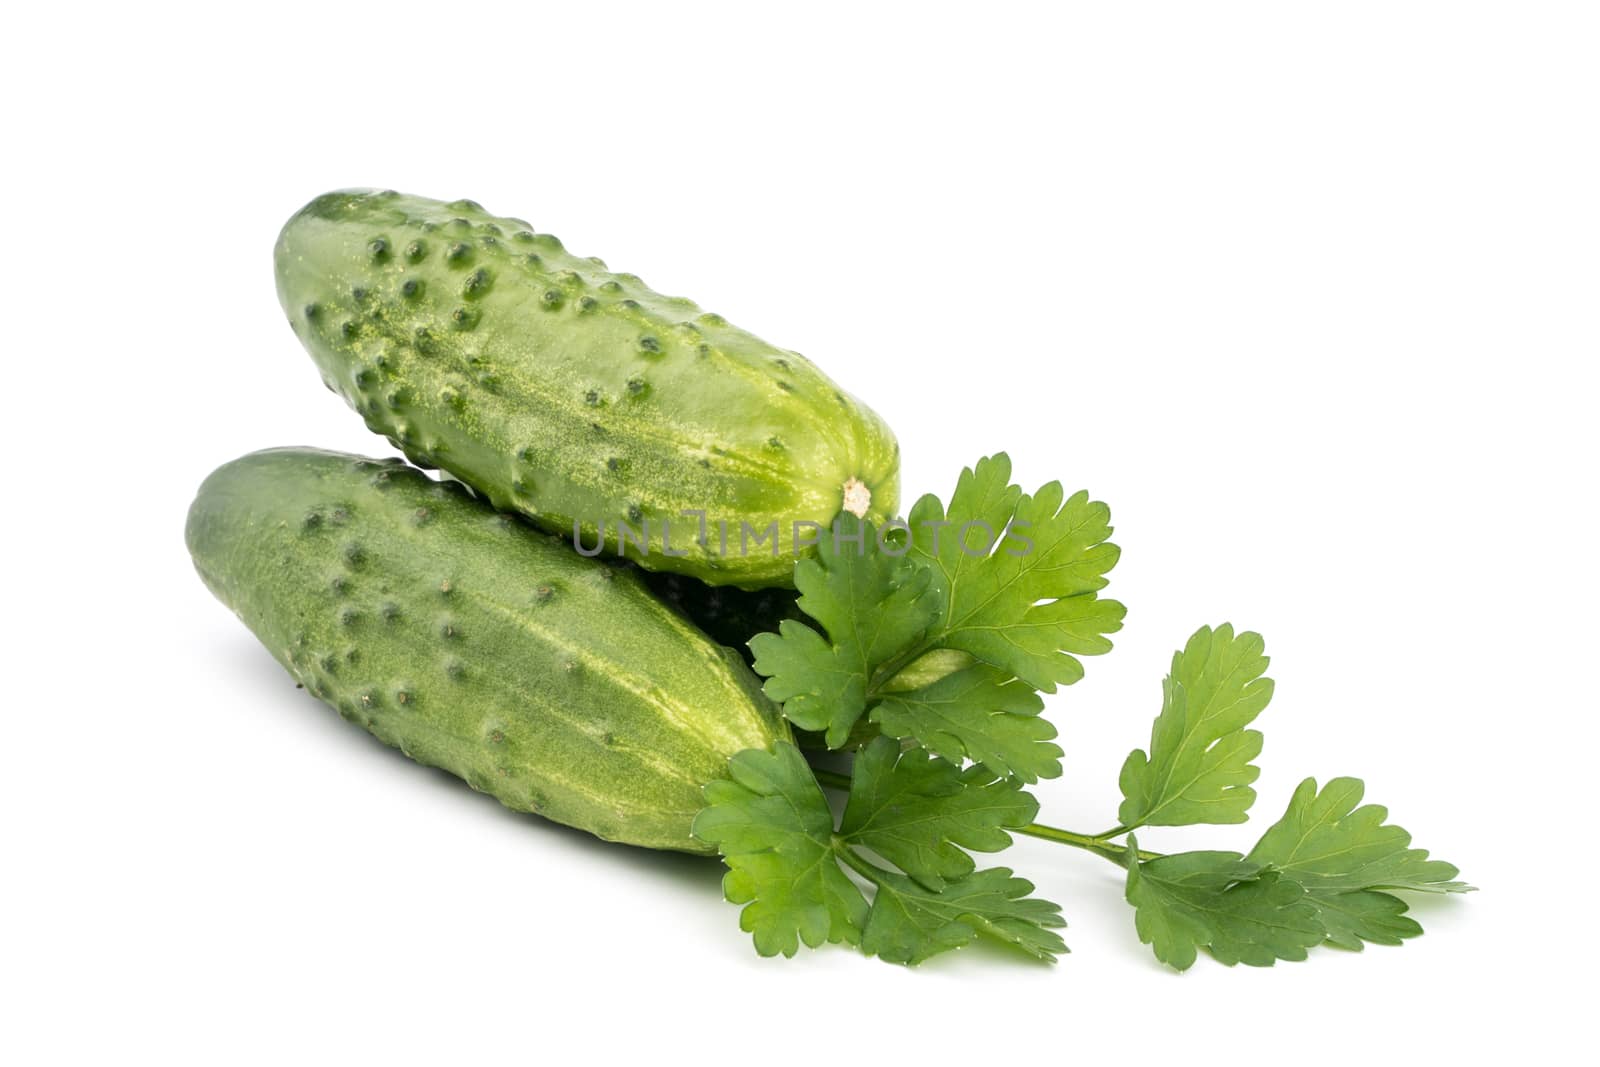 green cucumbers isolated on white background